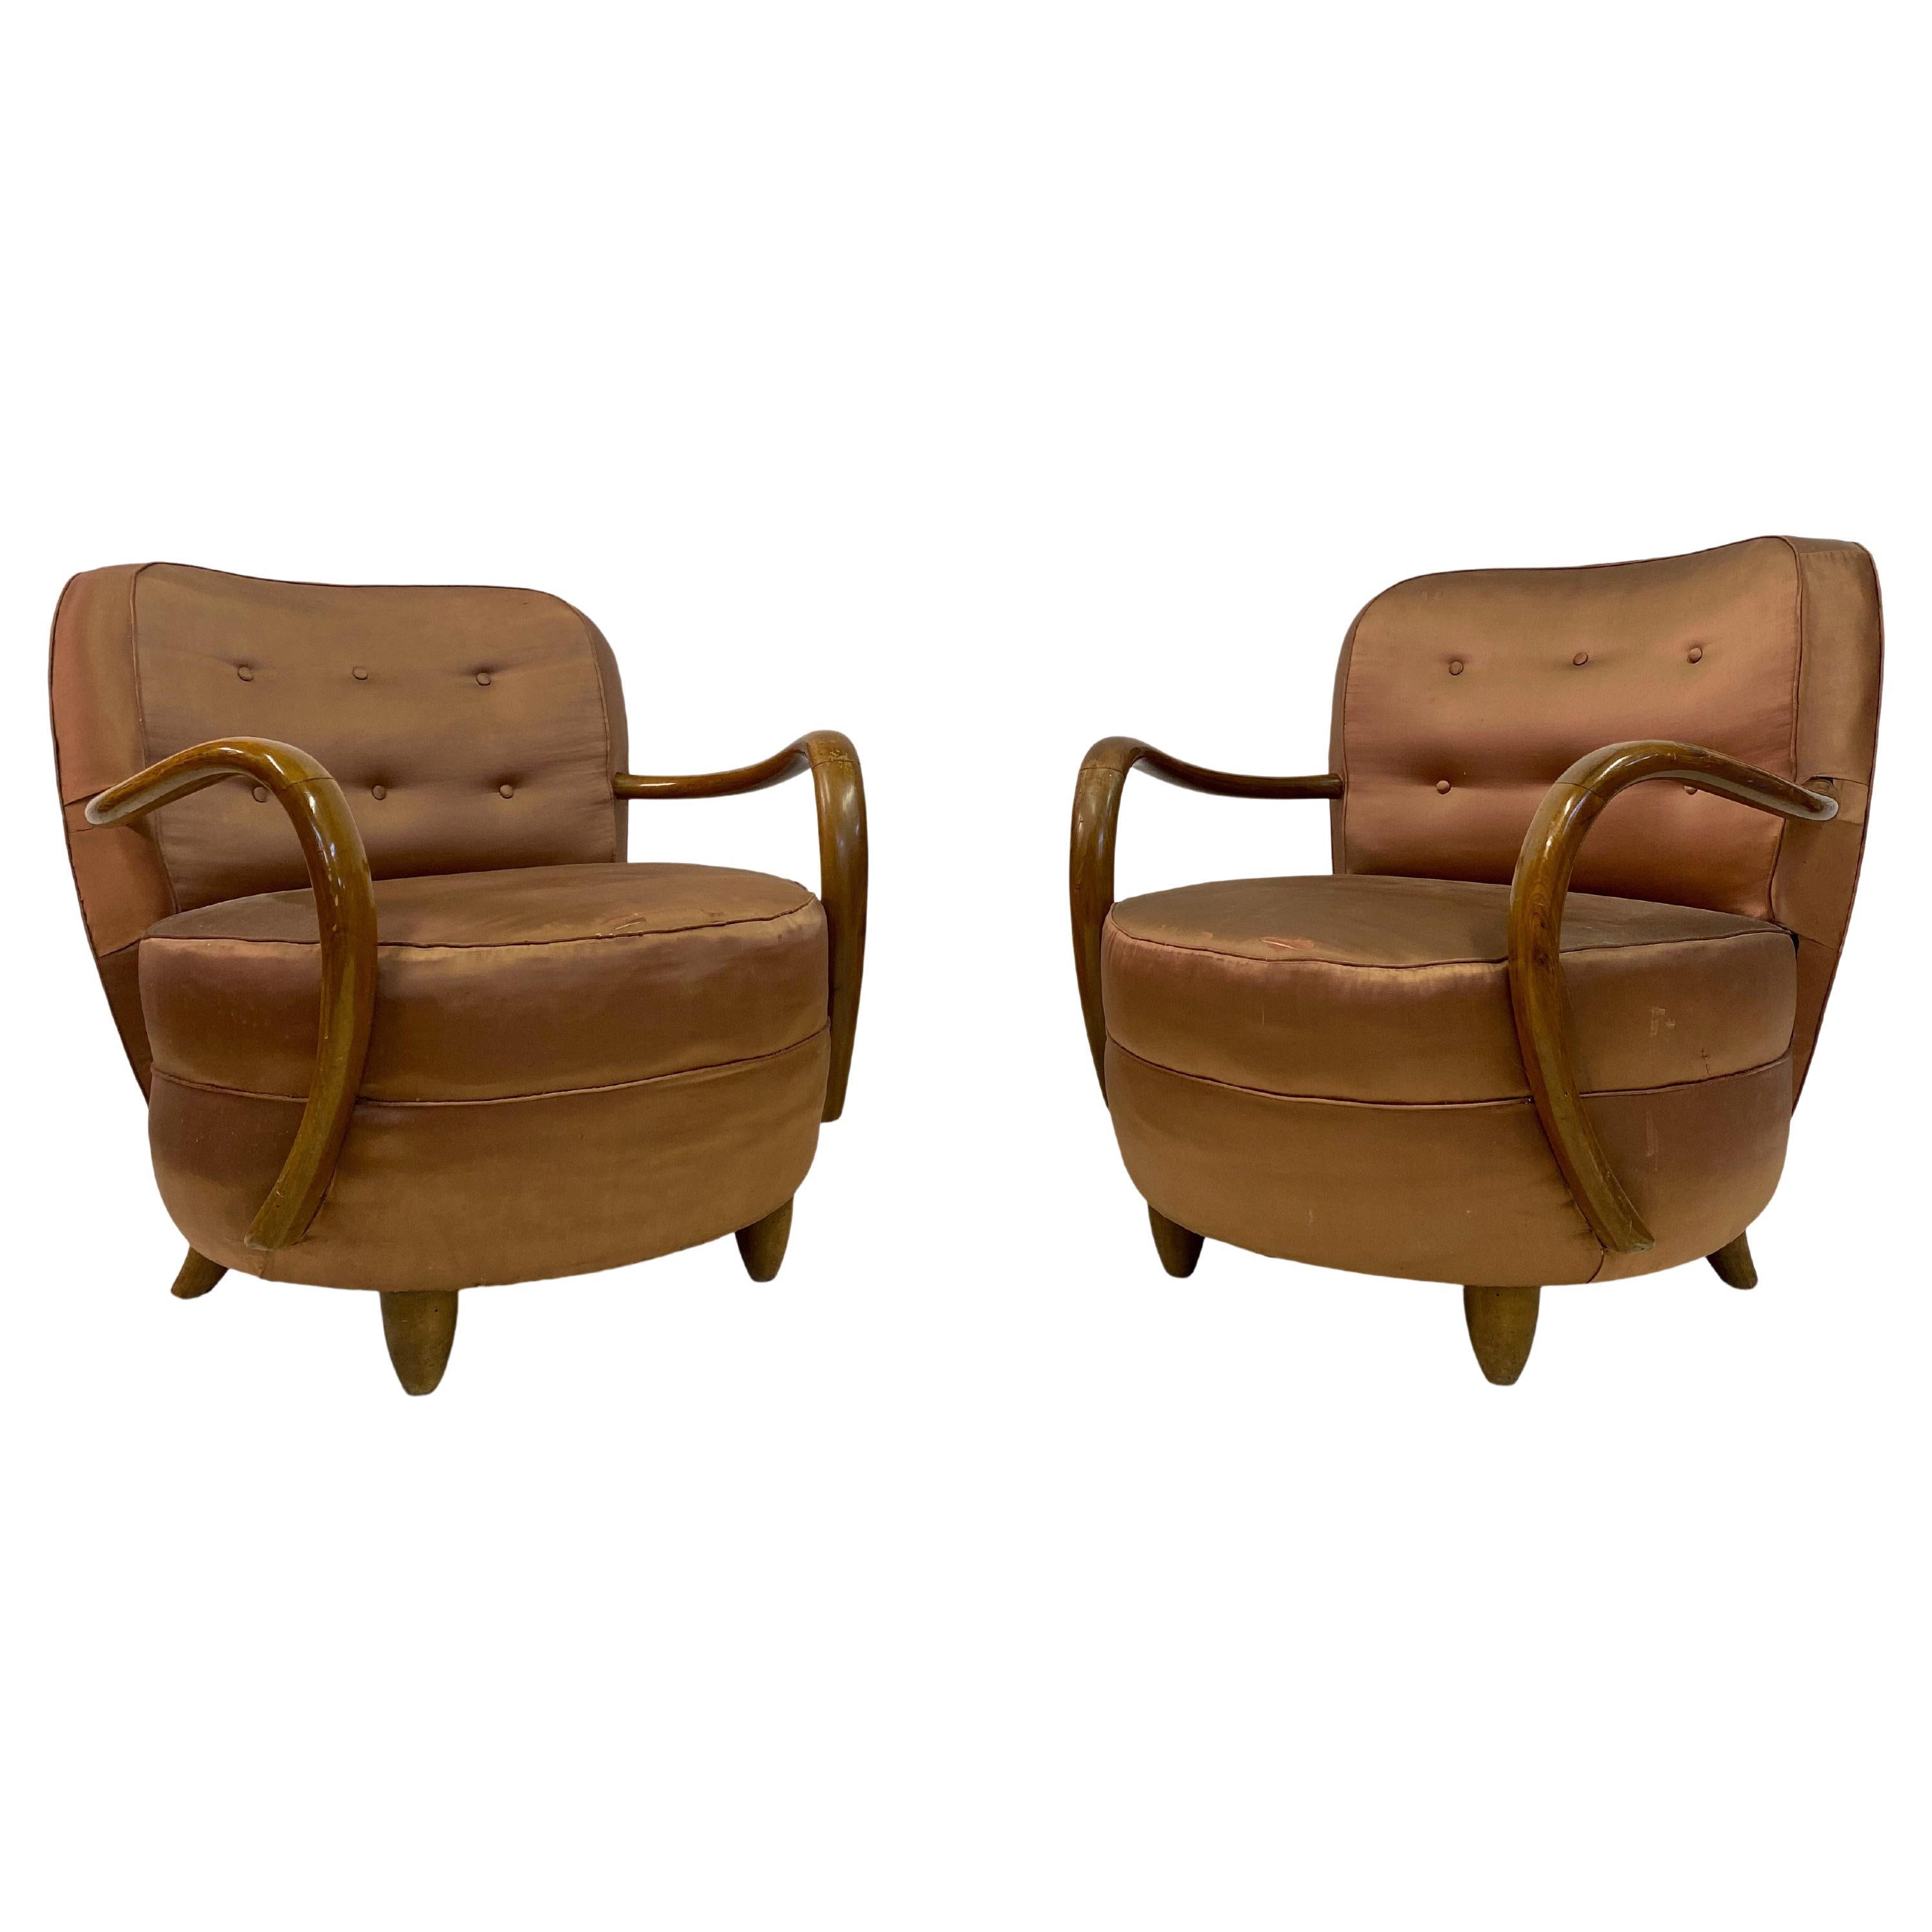 Pair of 1950s Italian Armchairs with Bentwood Arms